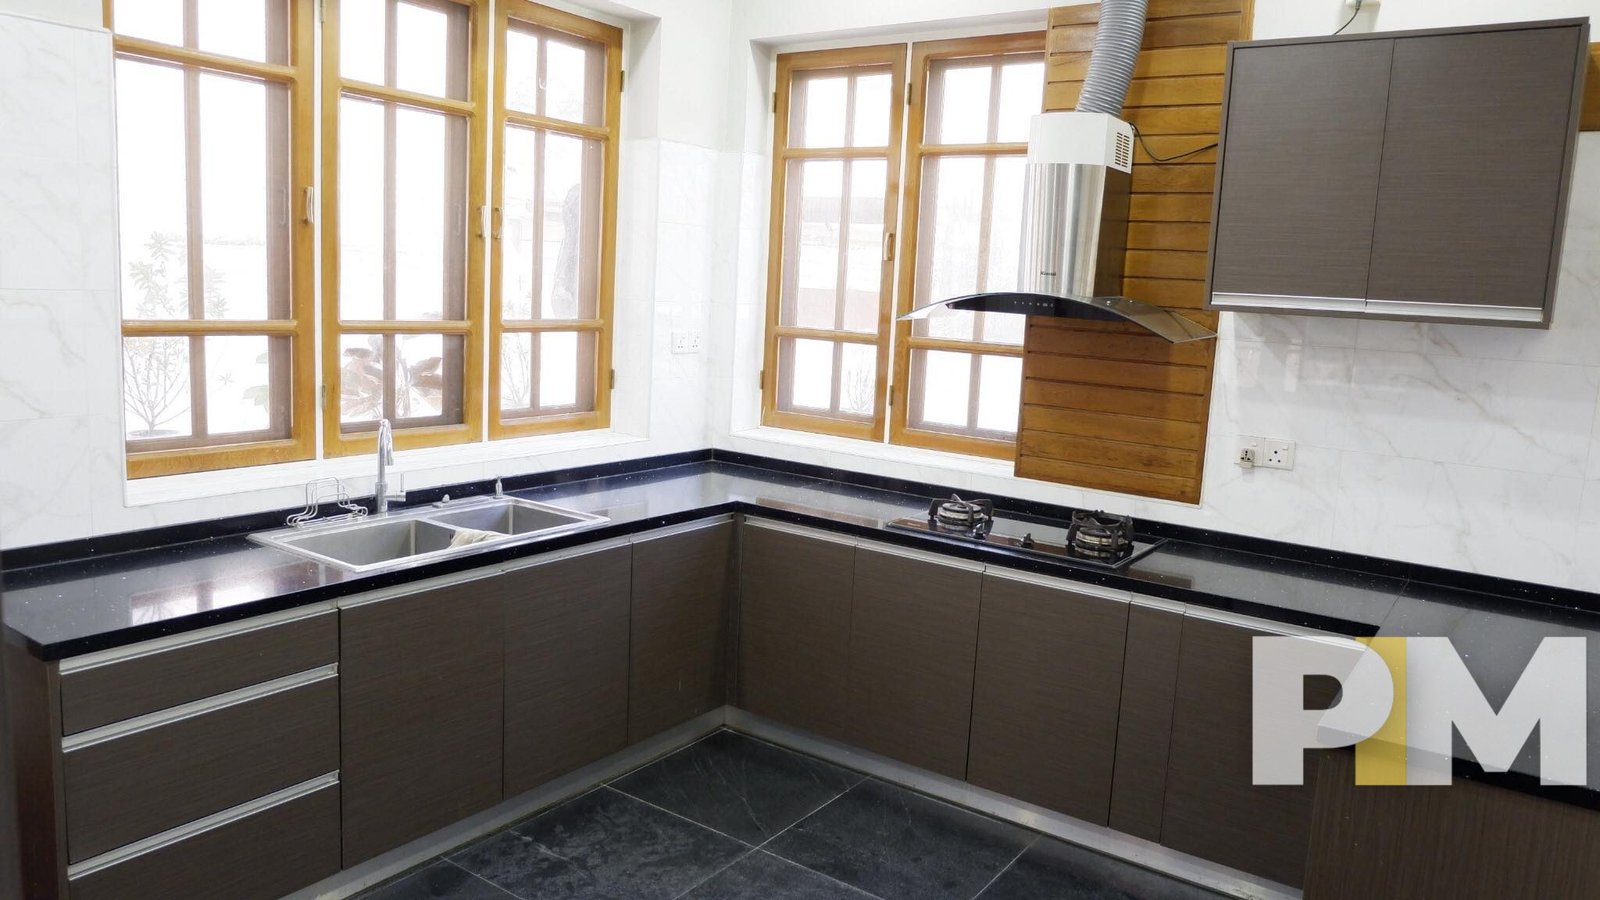 kitchen with stove - Yangon Real Estate